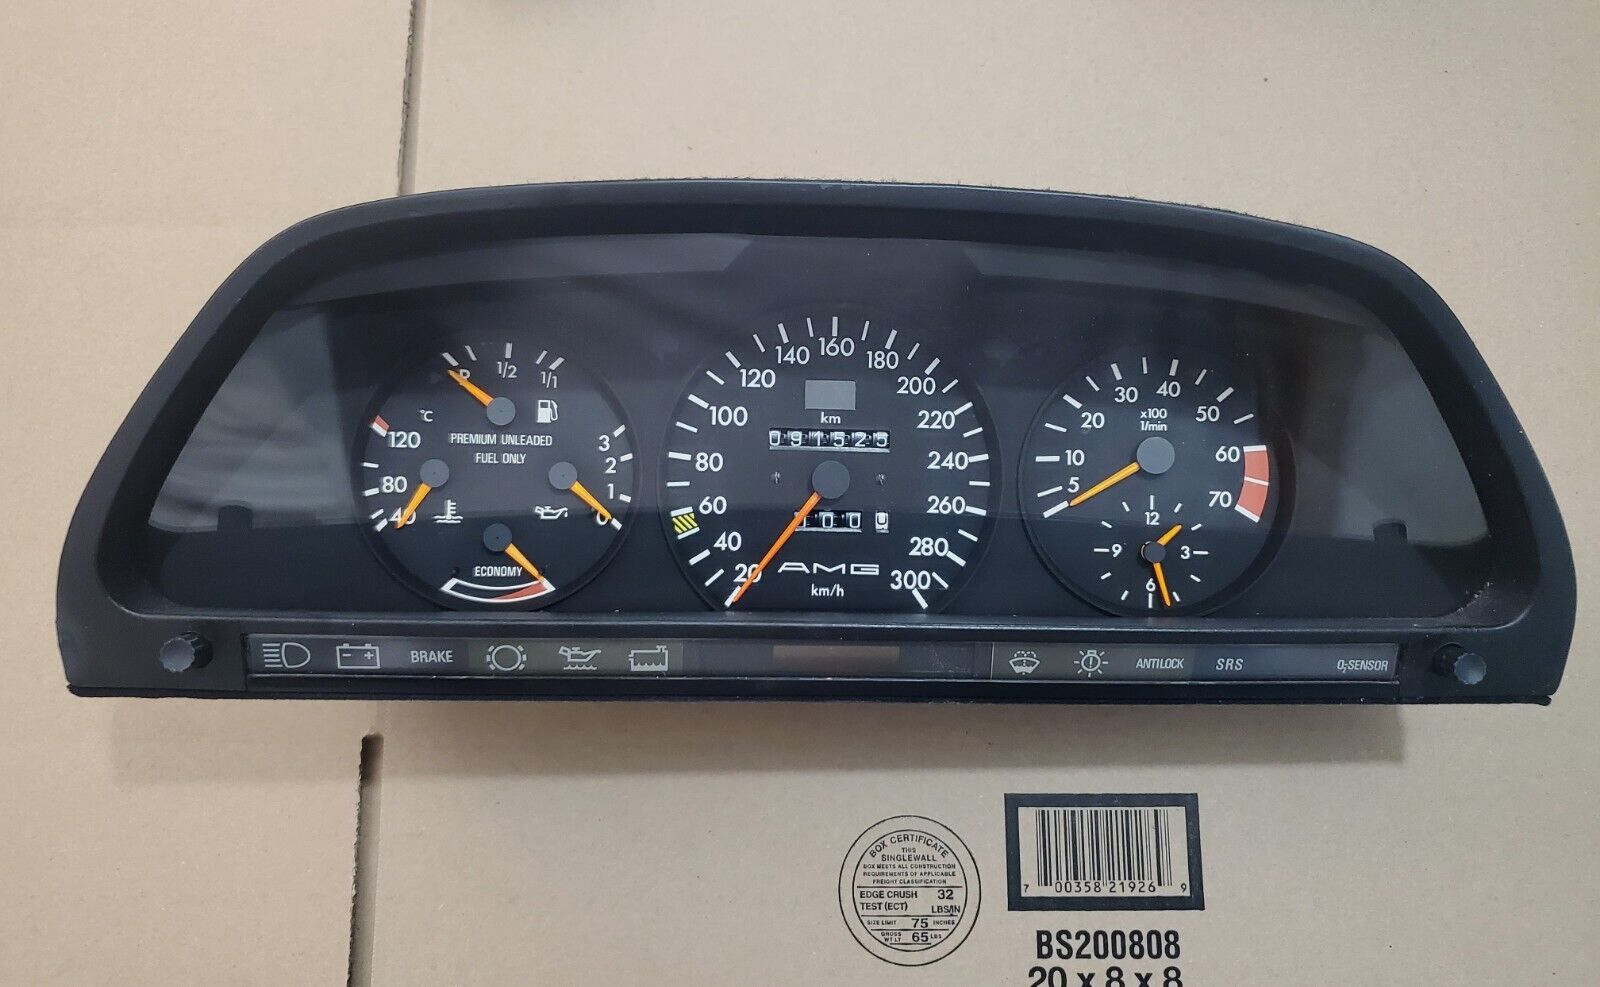 Mercedes W126 420SEL 560SEC 300km/h AMG speedometer cluster with rare ASR 81.5K